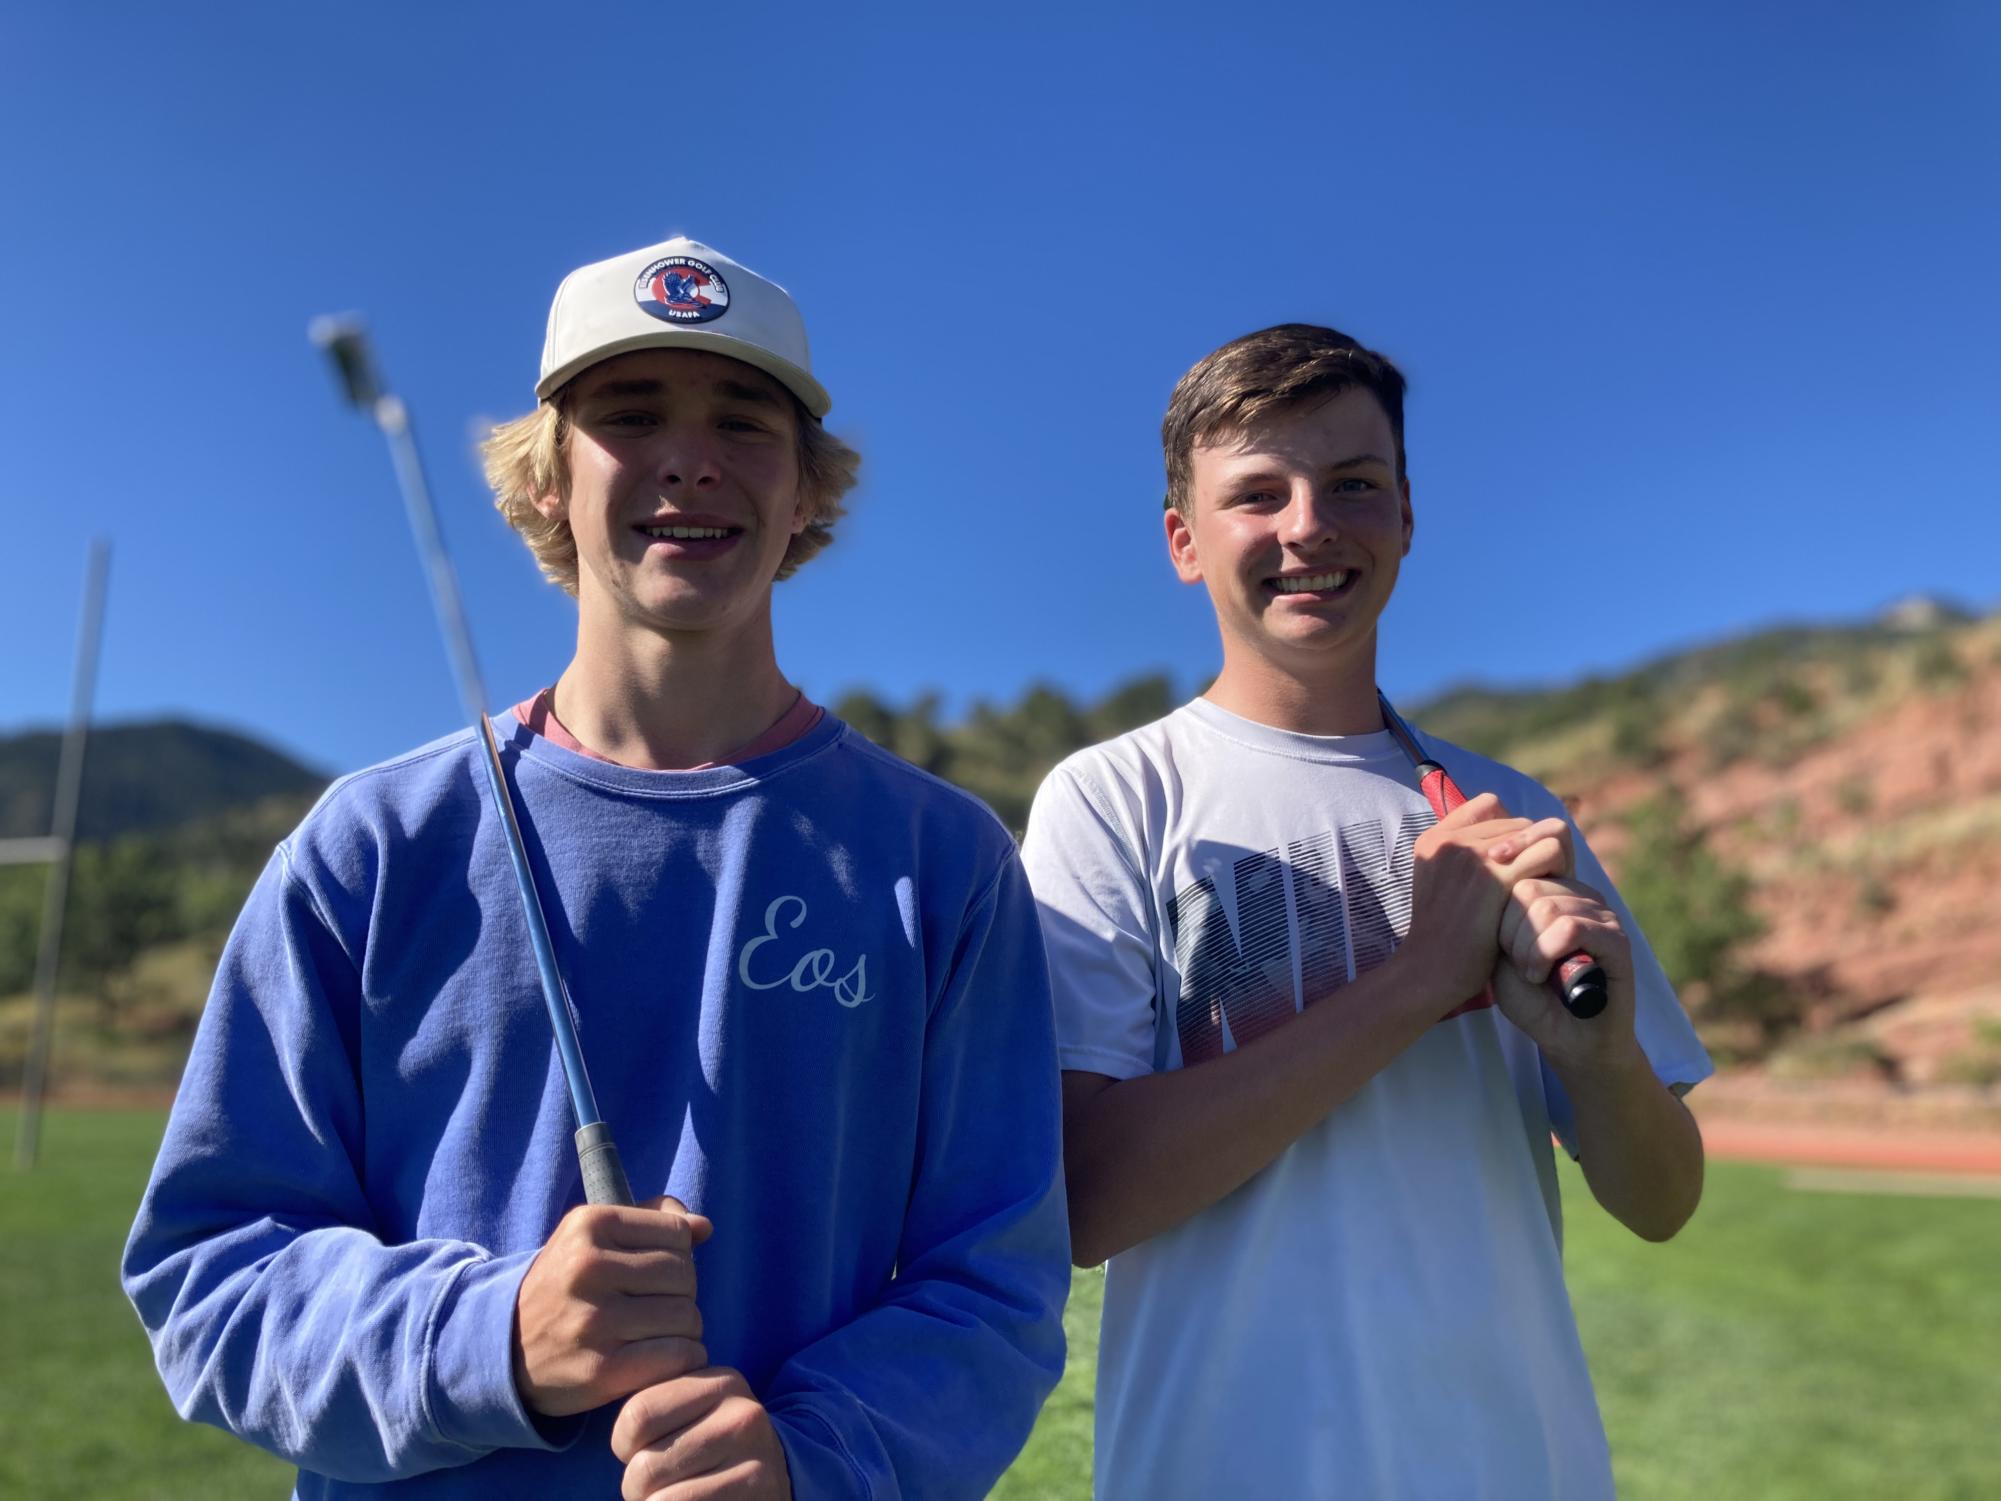 Golf team leaders Jack Clifford (12) and Hayden Dorsey (9) are hopeful to make it to and win the state champion this season.